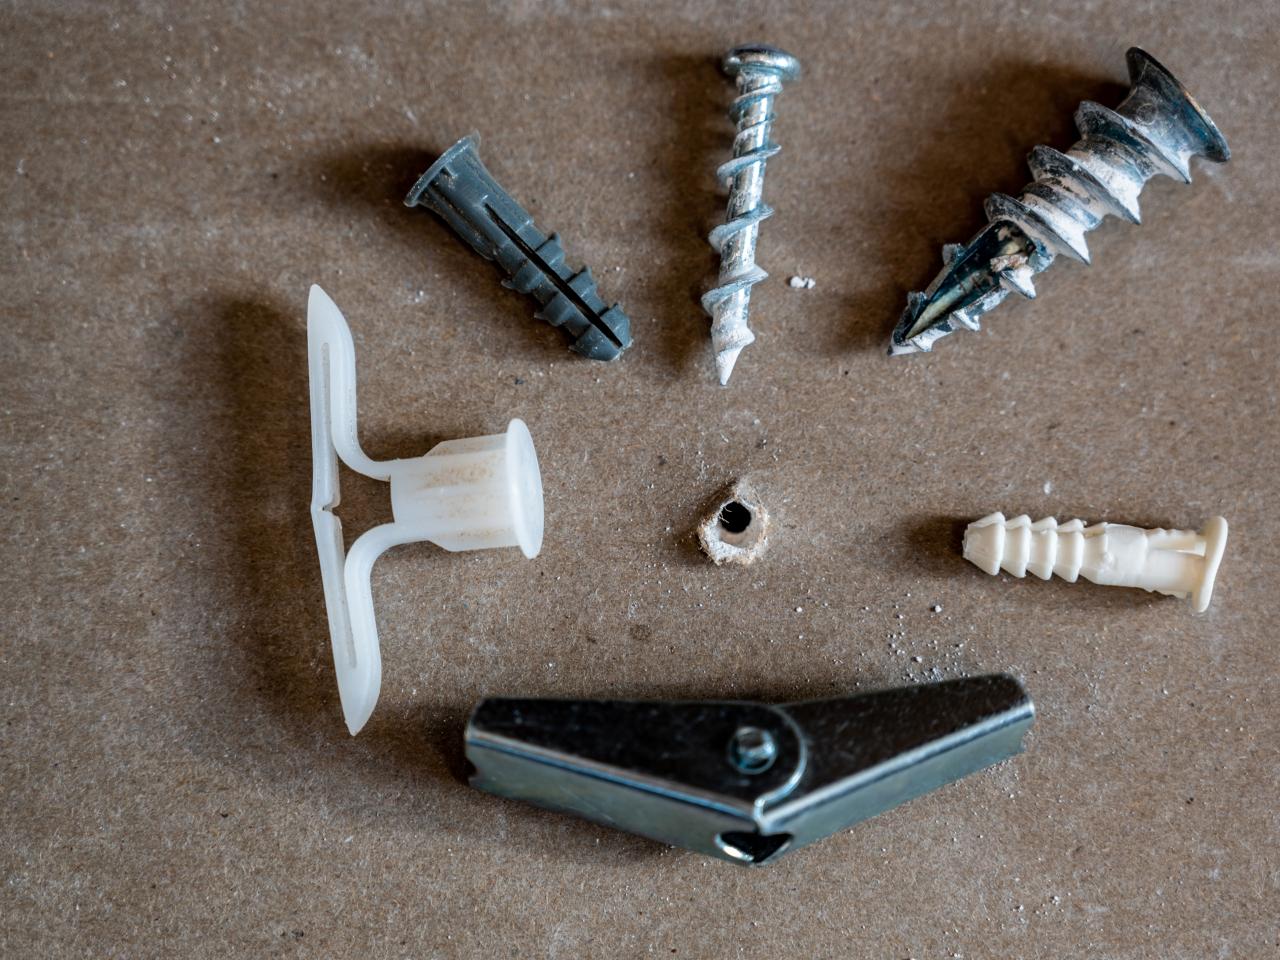 Everyday Items You Never Knew Used Metal Spring Clips